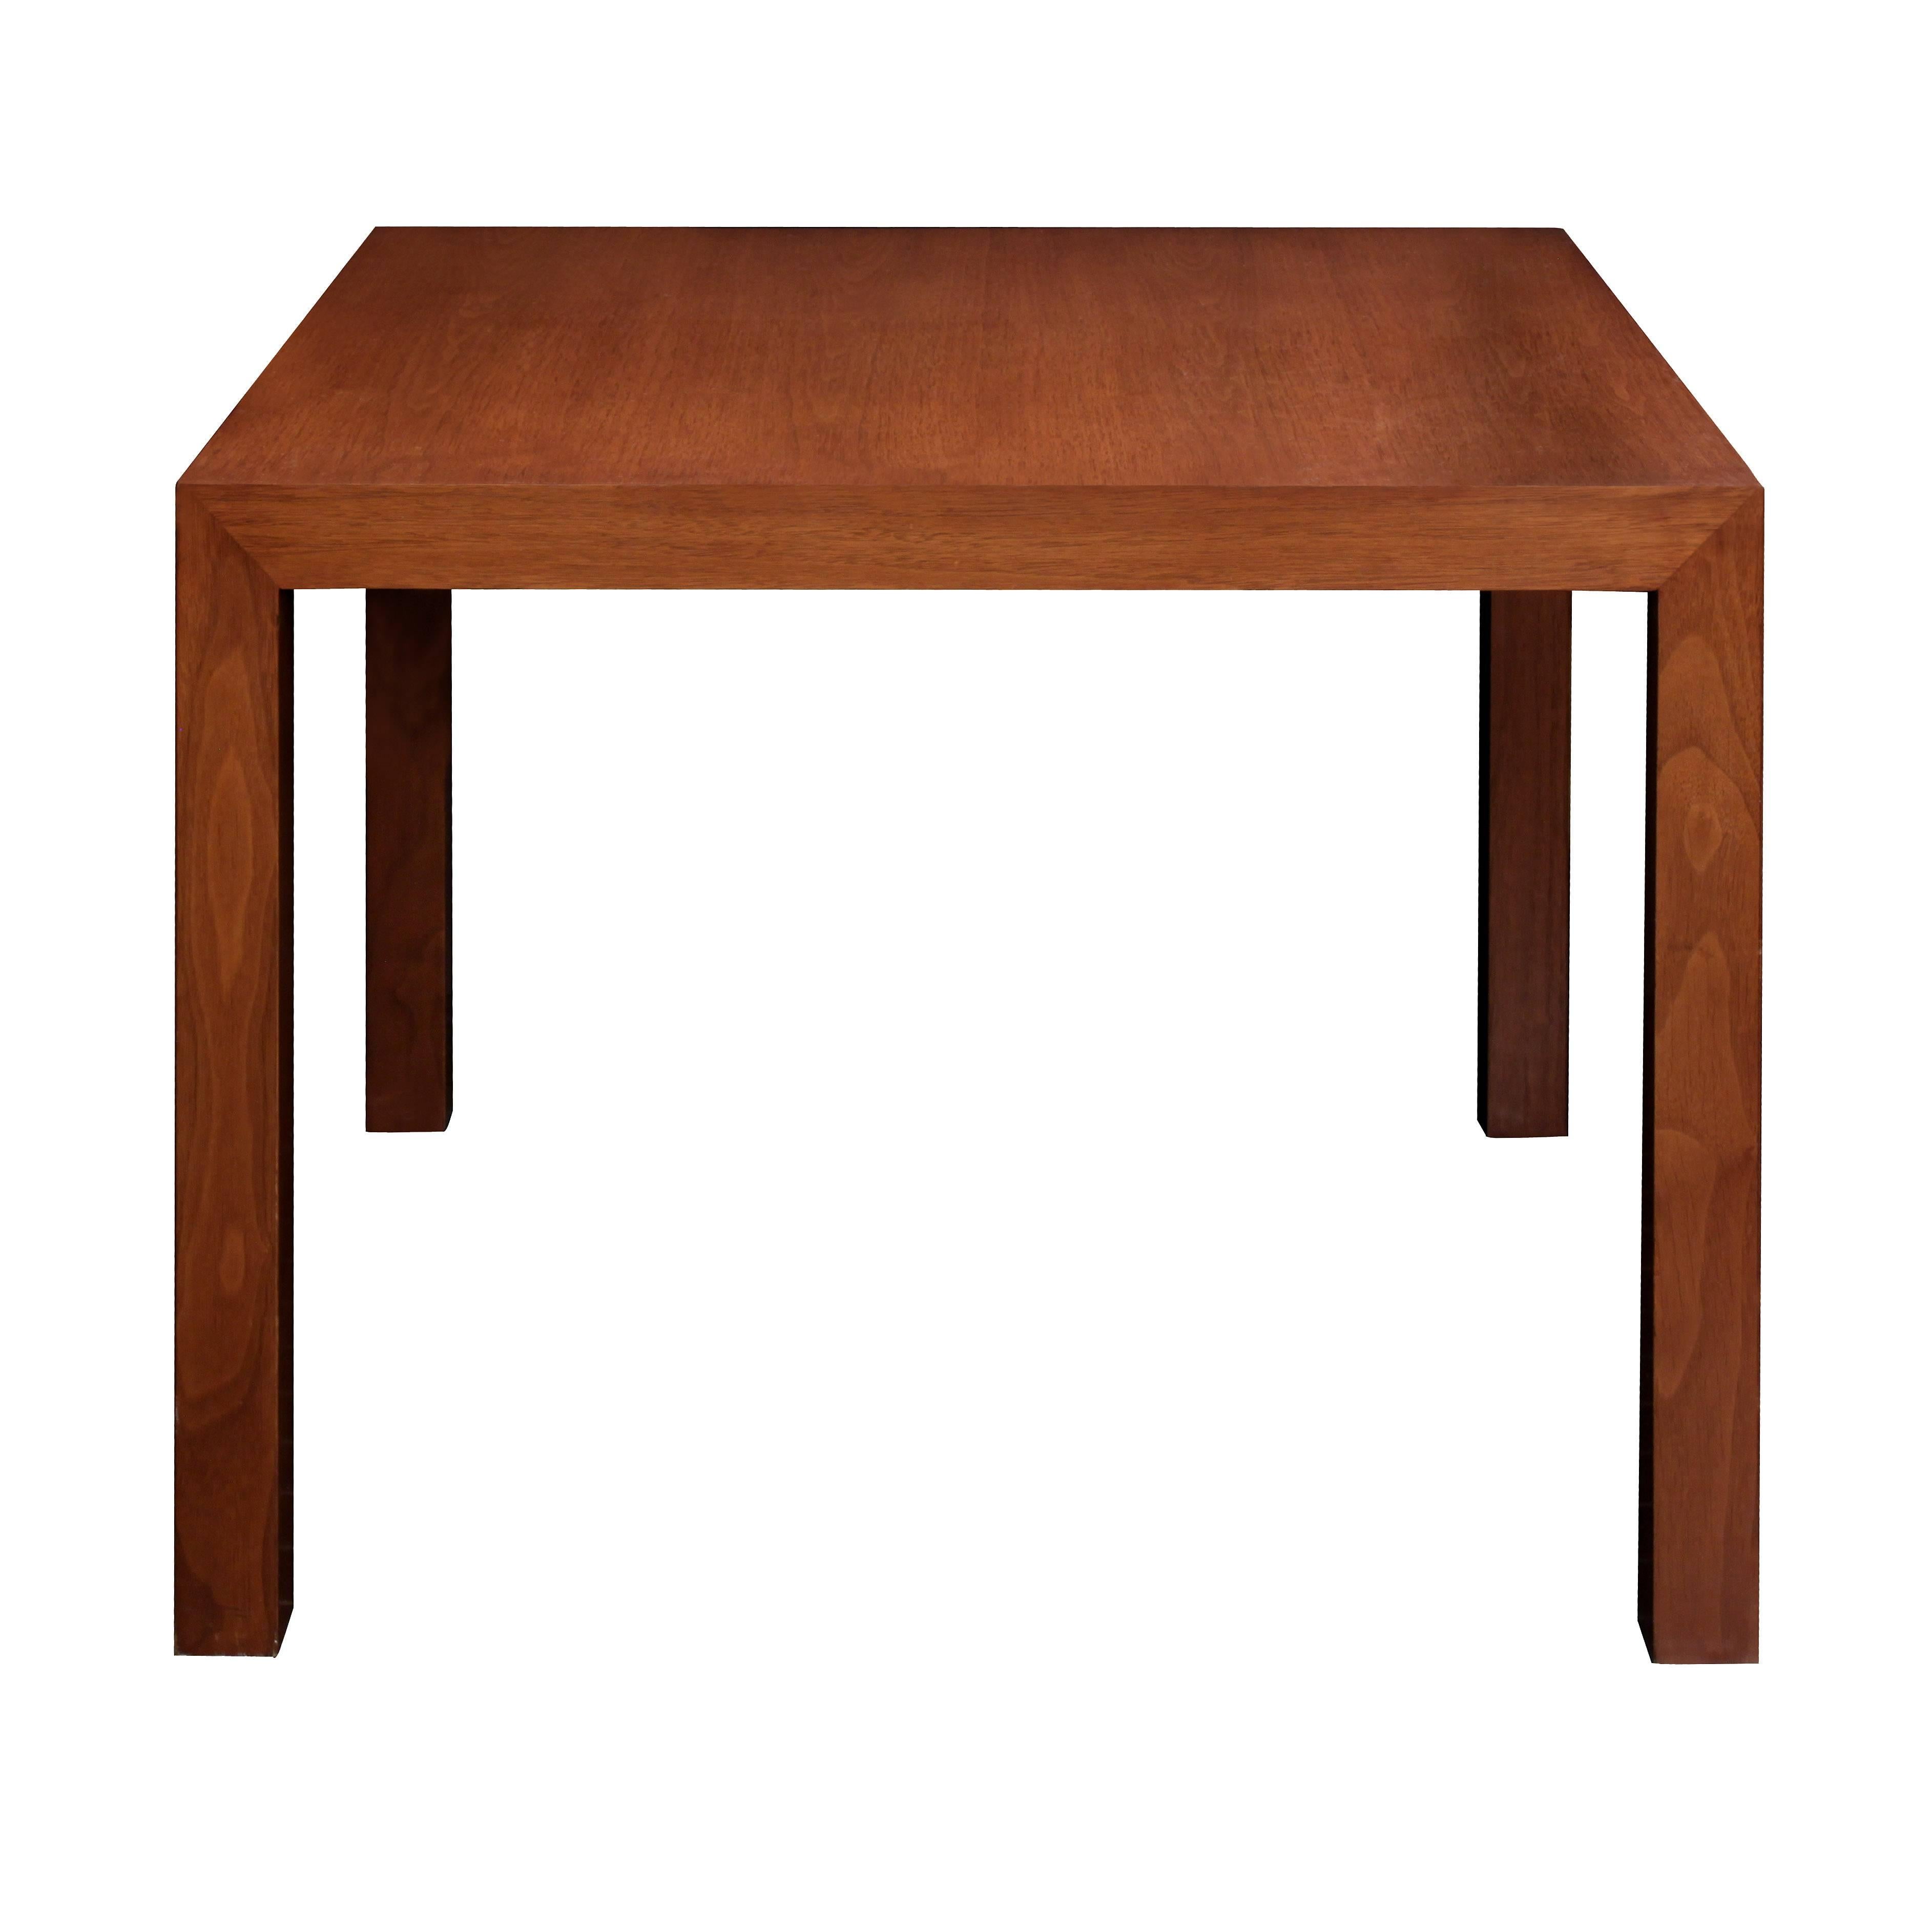 Parsons style side table in walnut by Edward Wormley for Dunbar, American, 1960s (Dunbar tag and label on bottom).